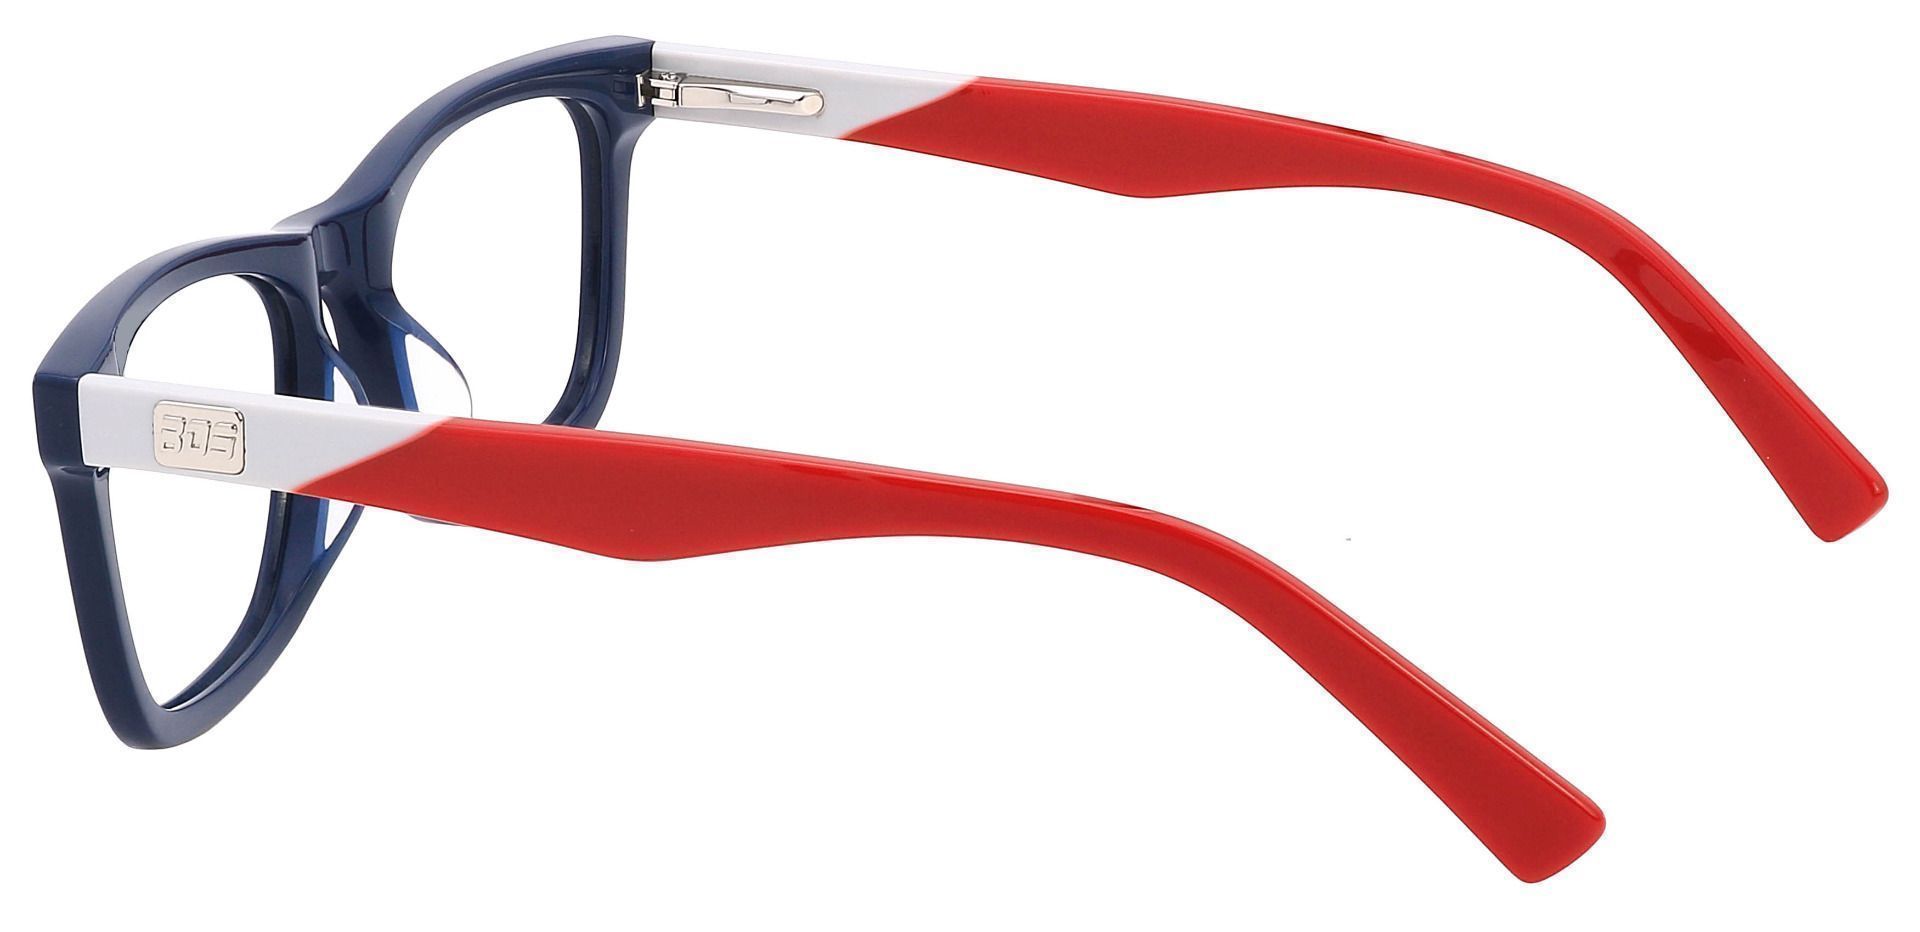 Newbury Rectangle Reading Glasses - The Frame Is Blue And Red